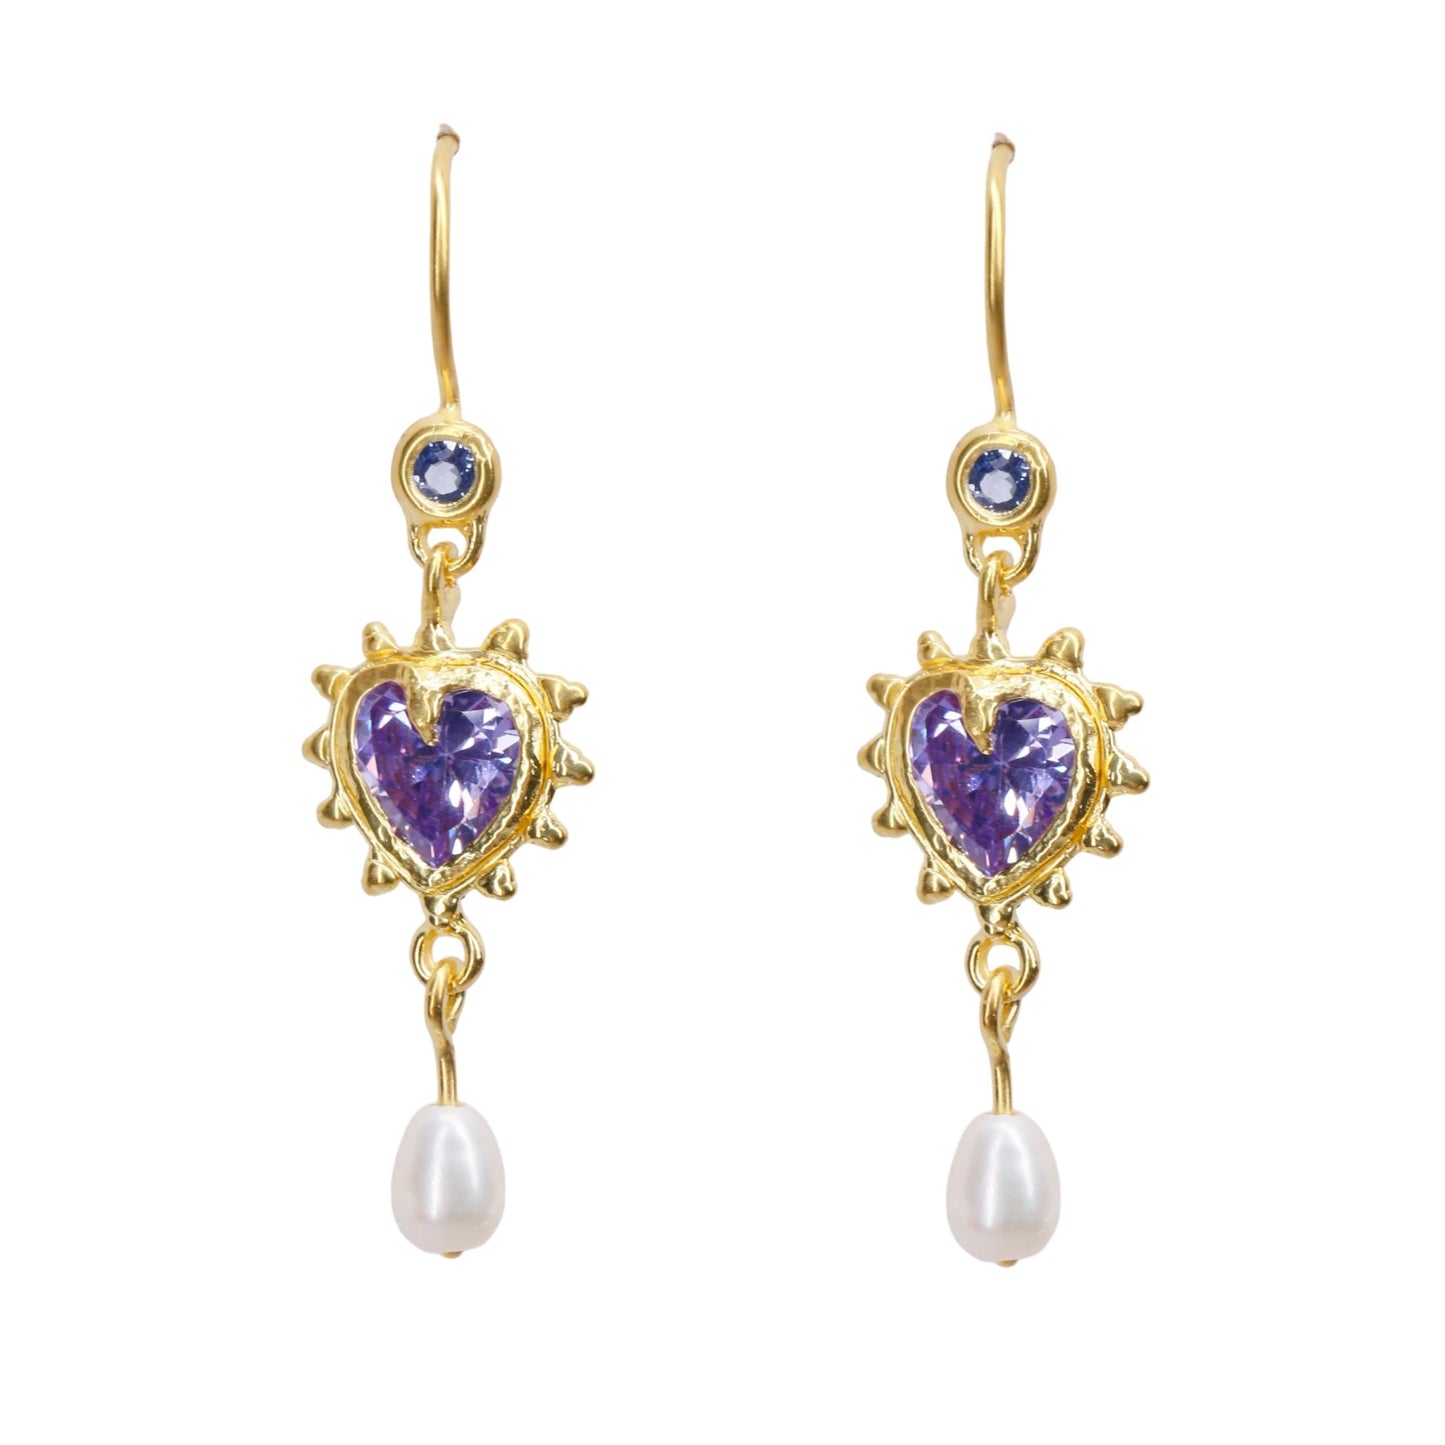 Limited Edition Lilac I Love Pearls Earrings